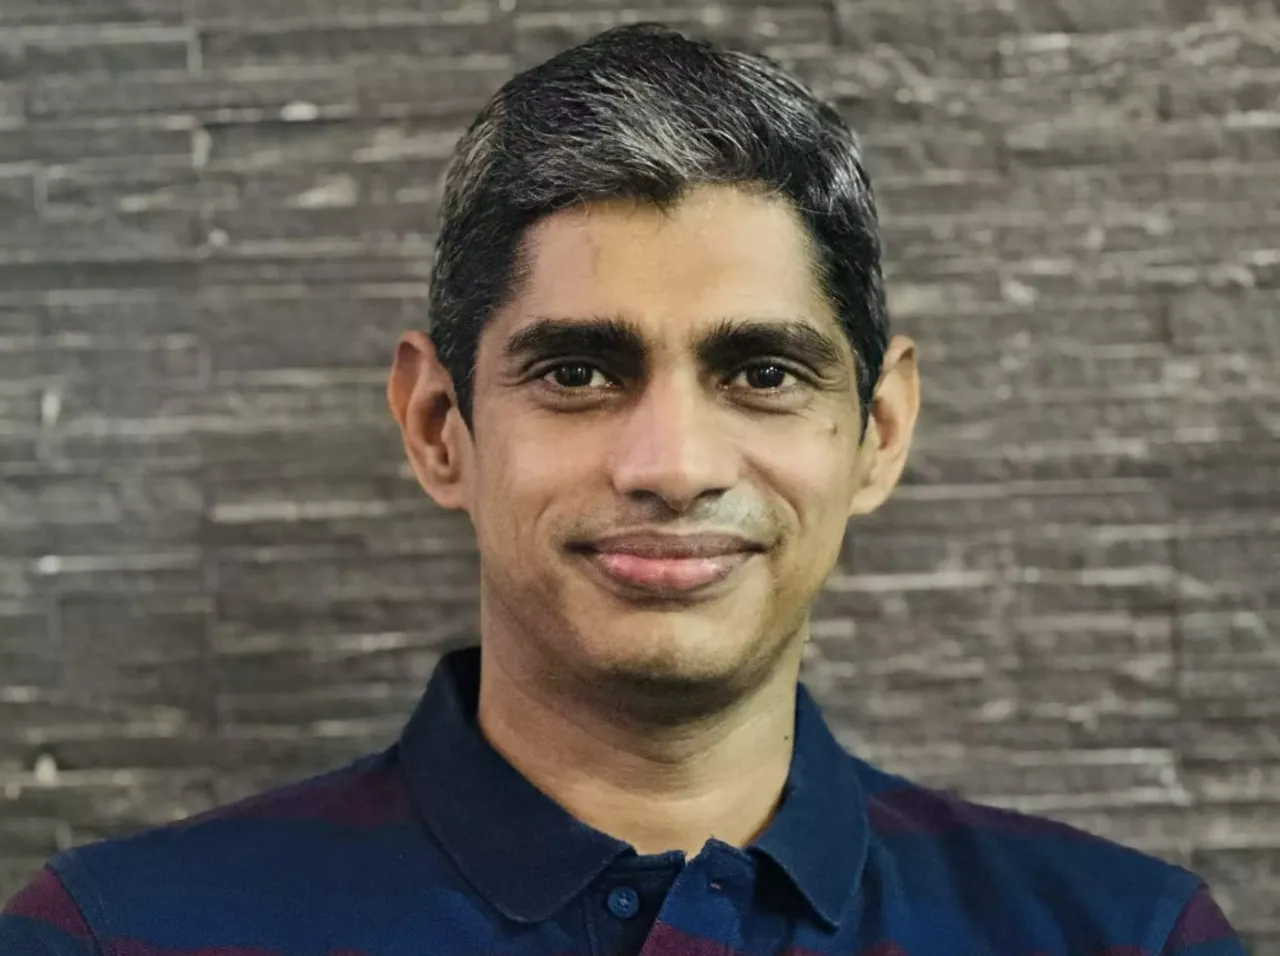 Elastic appoints Karthik Rajaram as the new VP and GM for India operations